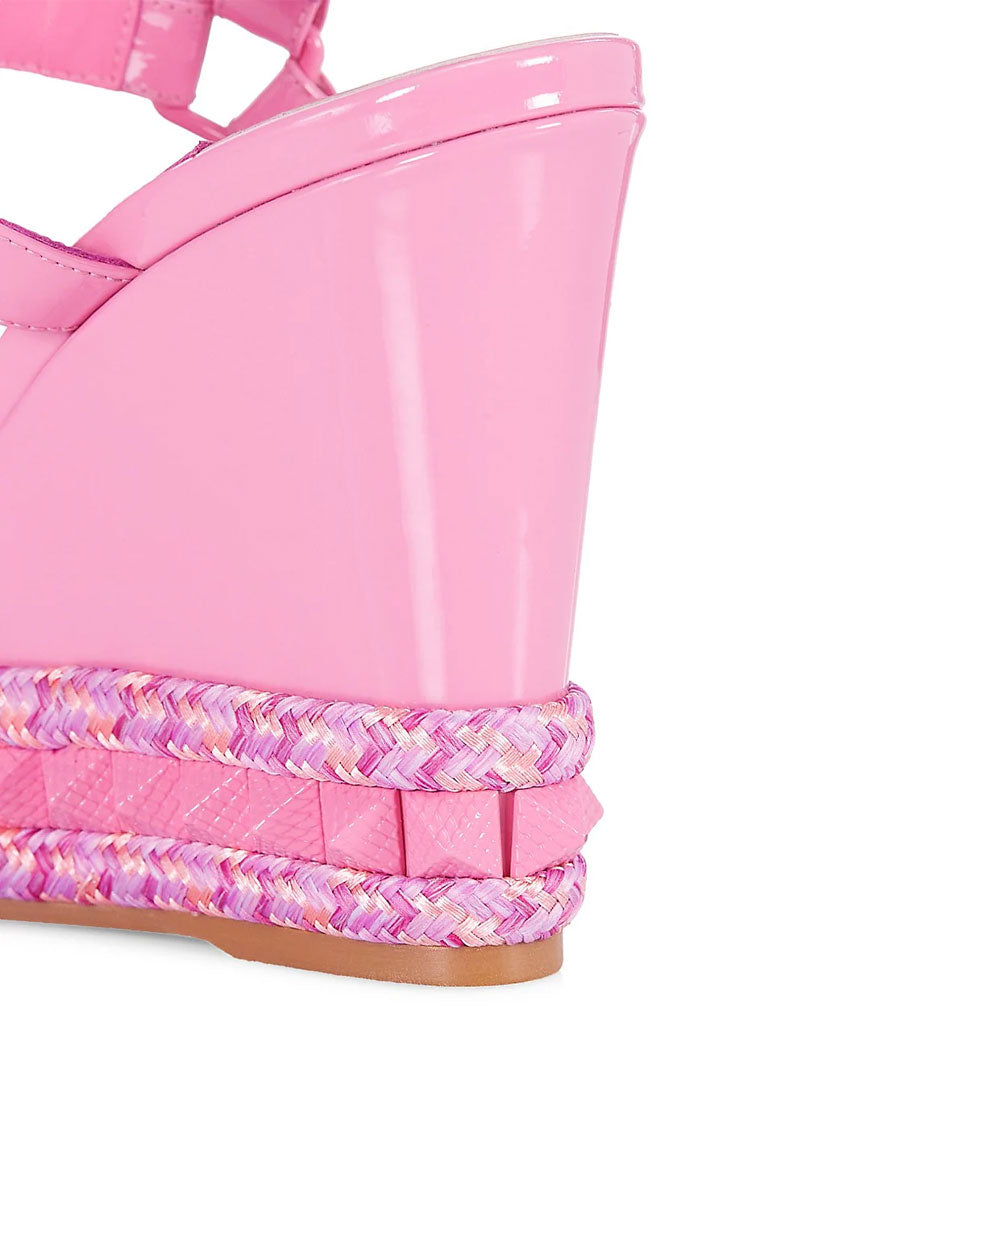 Christian Louboutin Pyraclou 110 Patent Leather Wedge Sandals in Pink